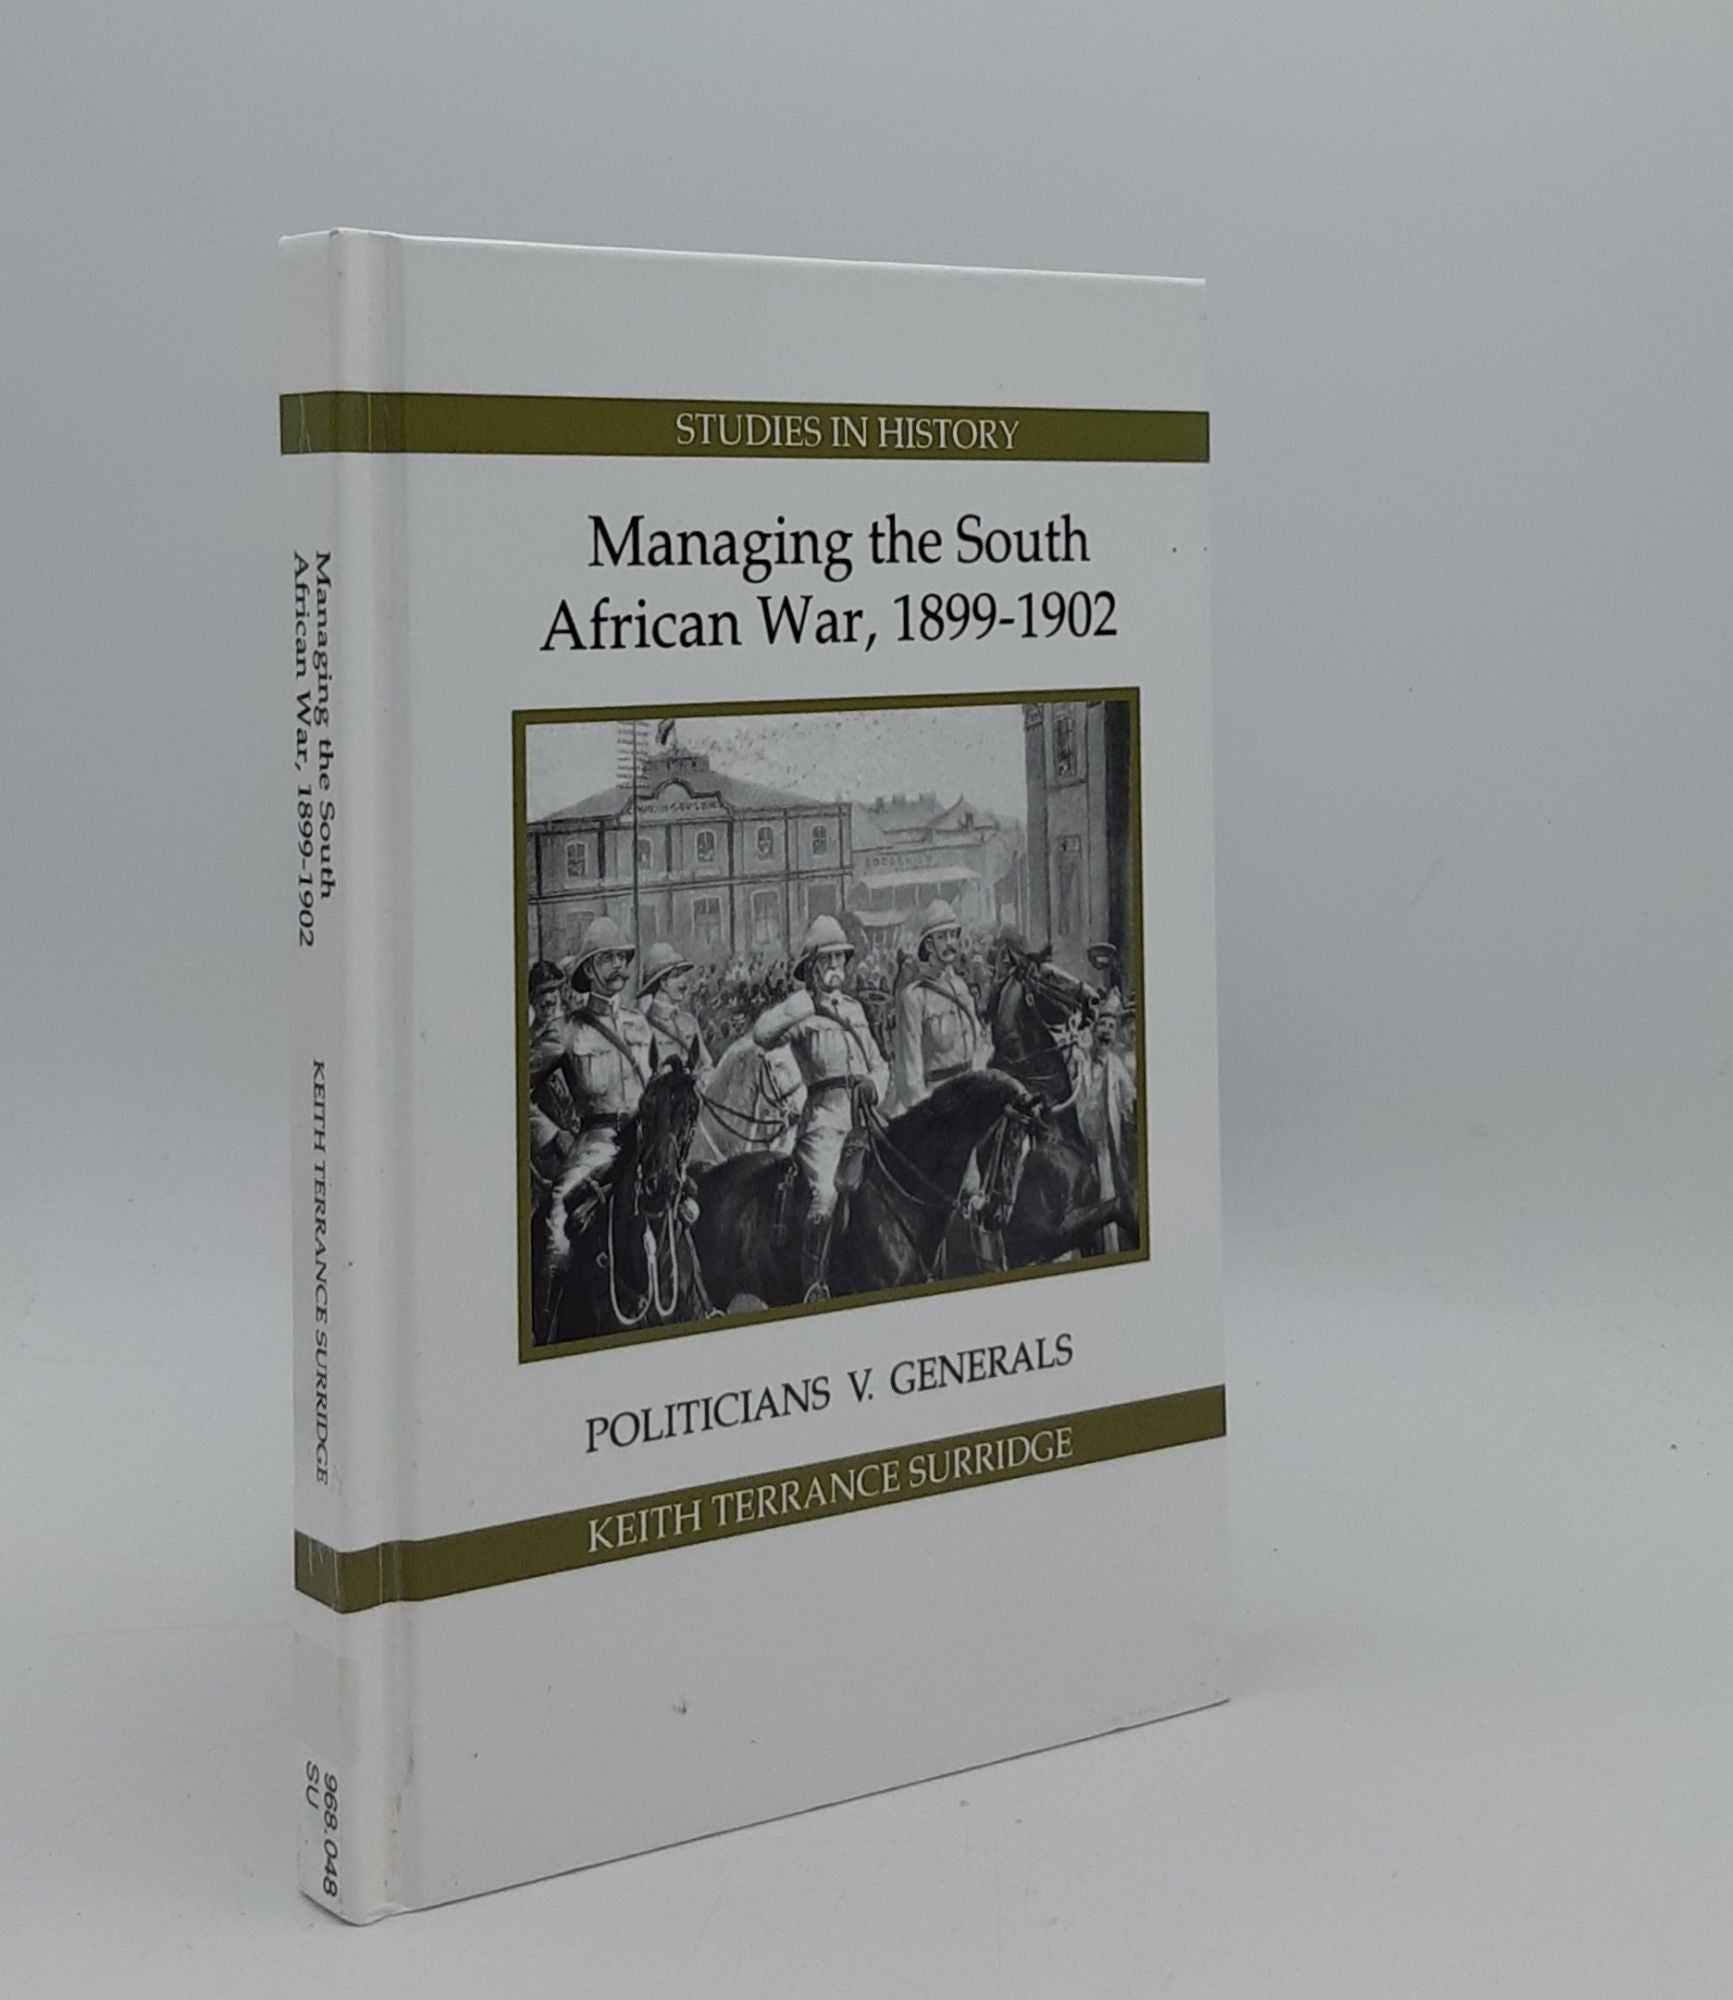 SURRIDGE Keith Terrance - Managing the South African War 1899-1902 Politicians V. Generals